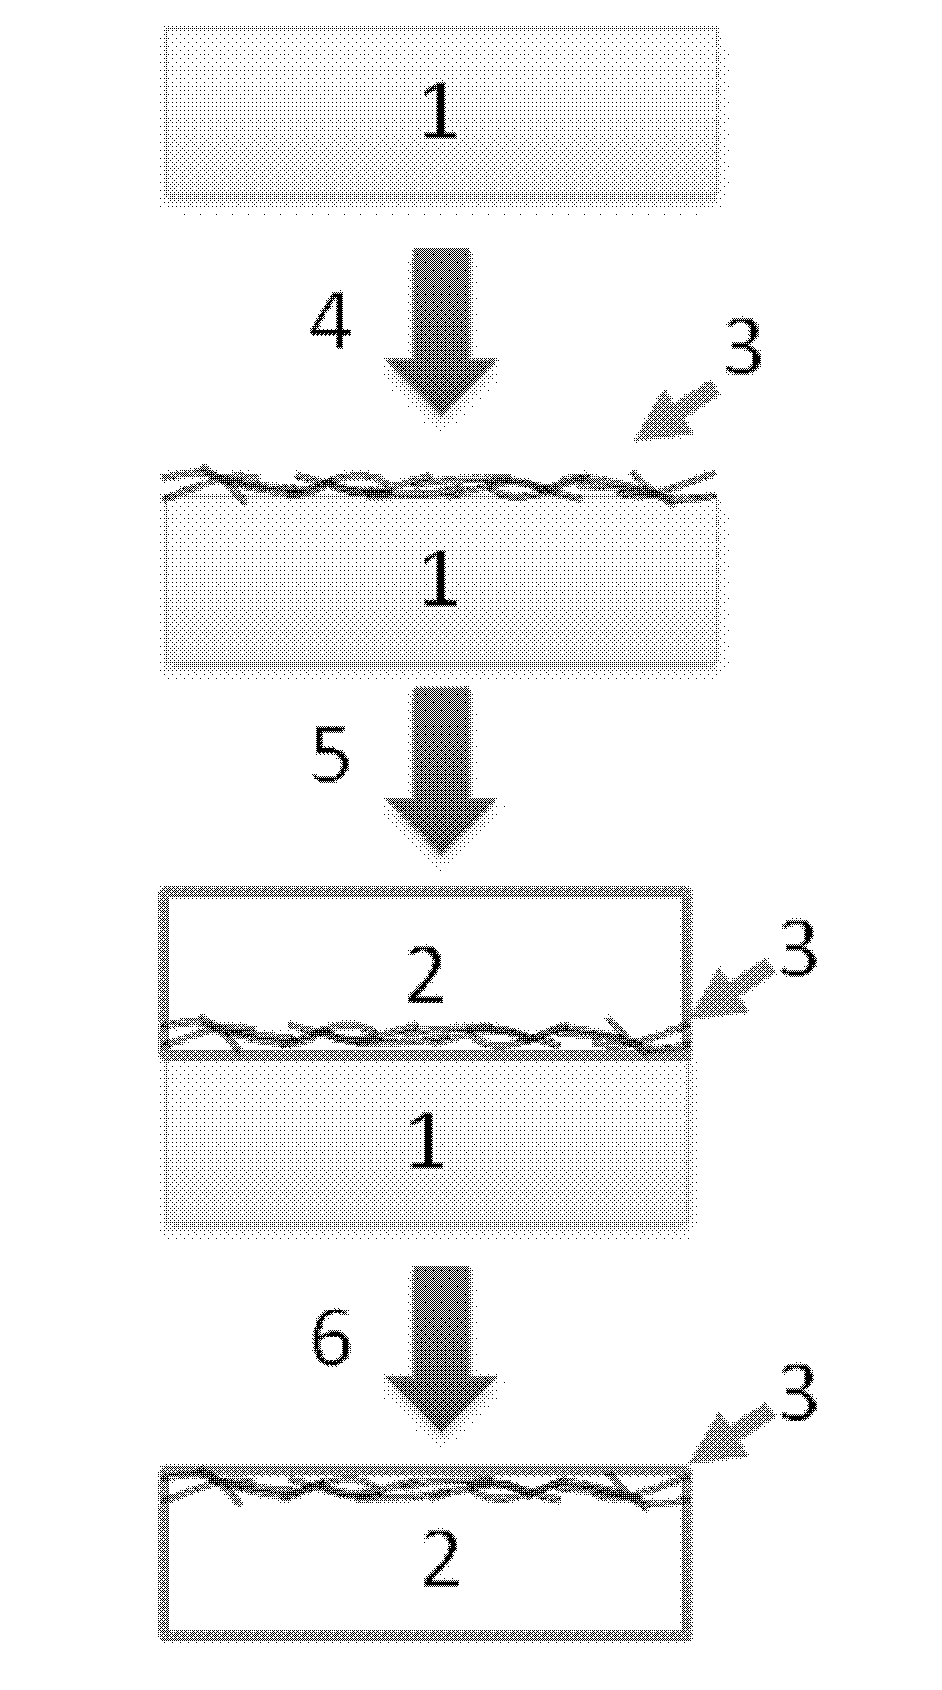 Silver nanowire transparent conductive film based on thermoplastic transparent polymer and preparation method thereof